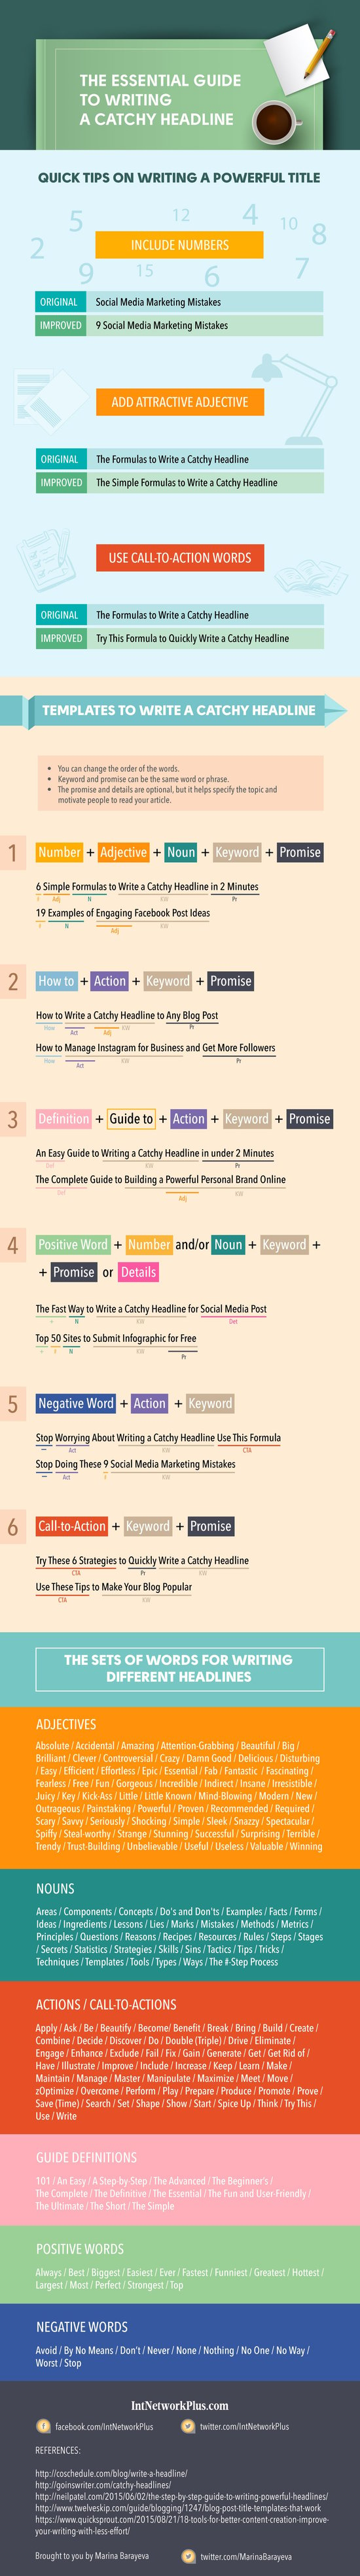 How to Write Headlines That Work: Tips, Templates and Top Words